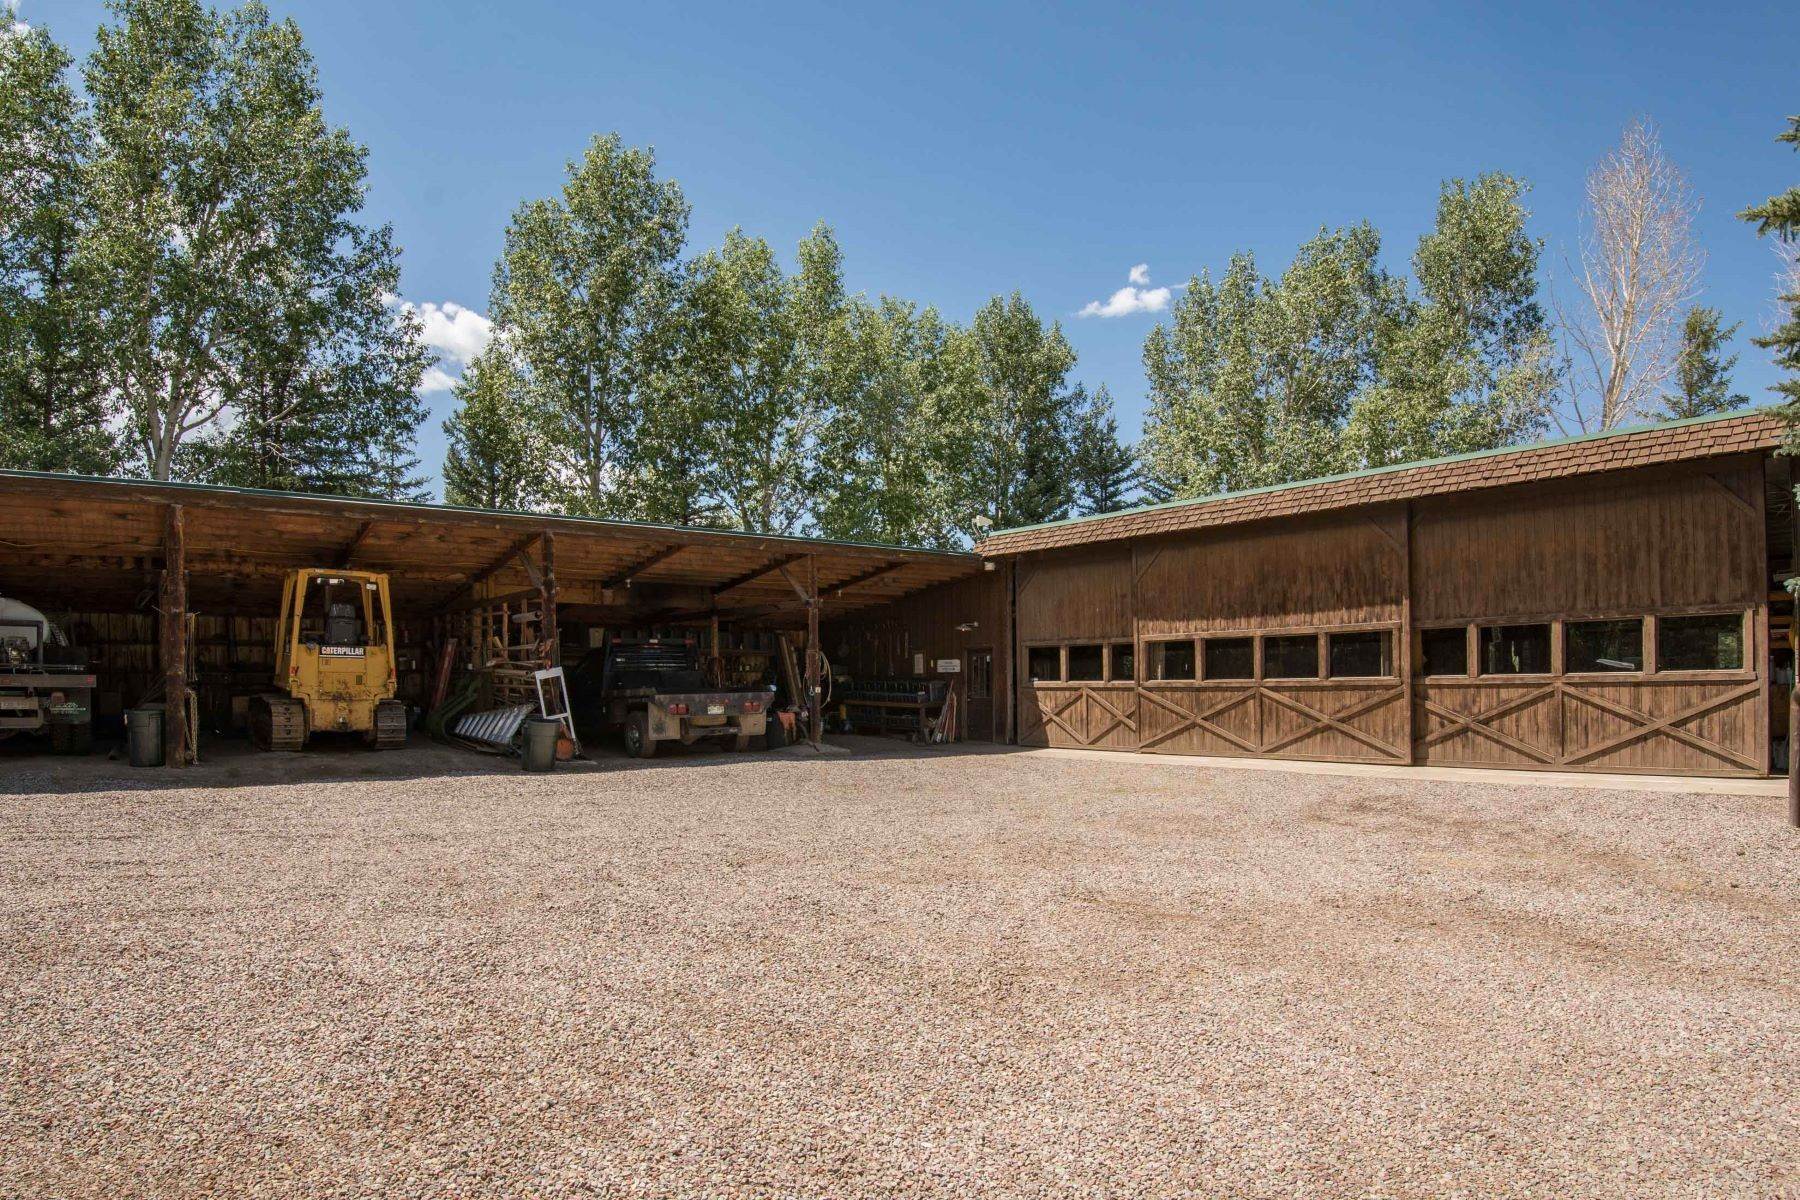 43. Land at 1321 Elk Creek & TBD McCabe Ranch Old Snowmass, Colorado 81654 United States